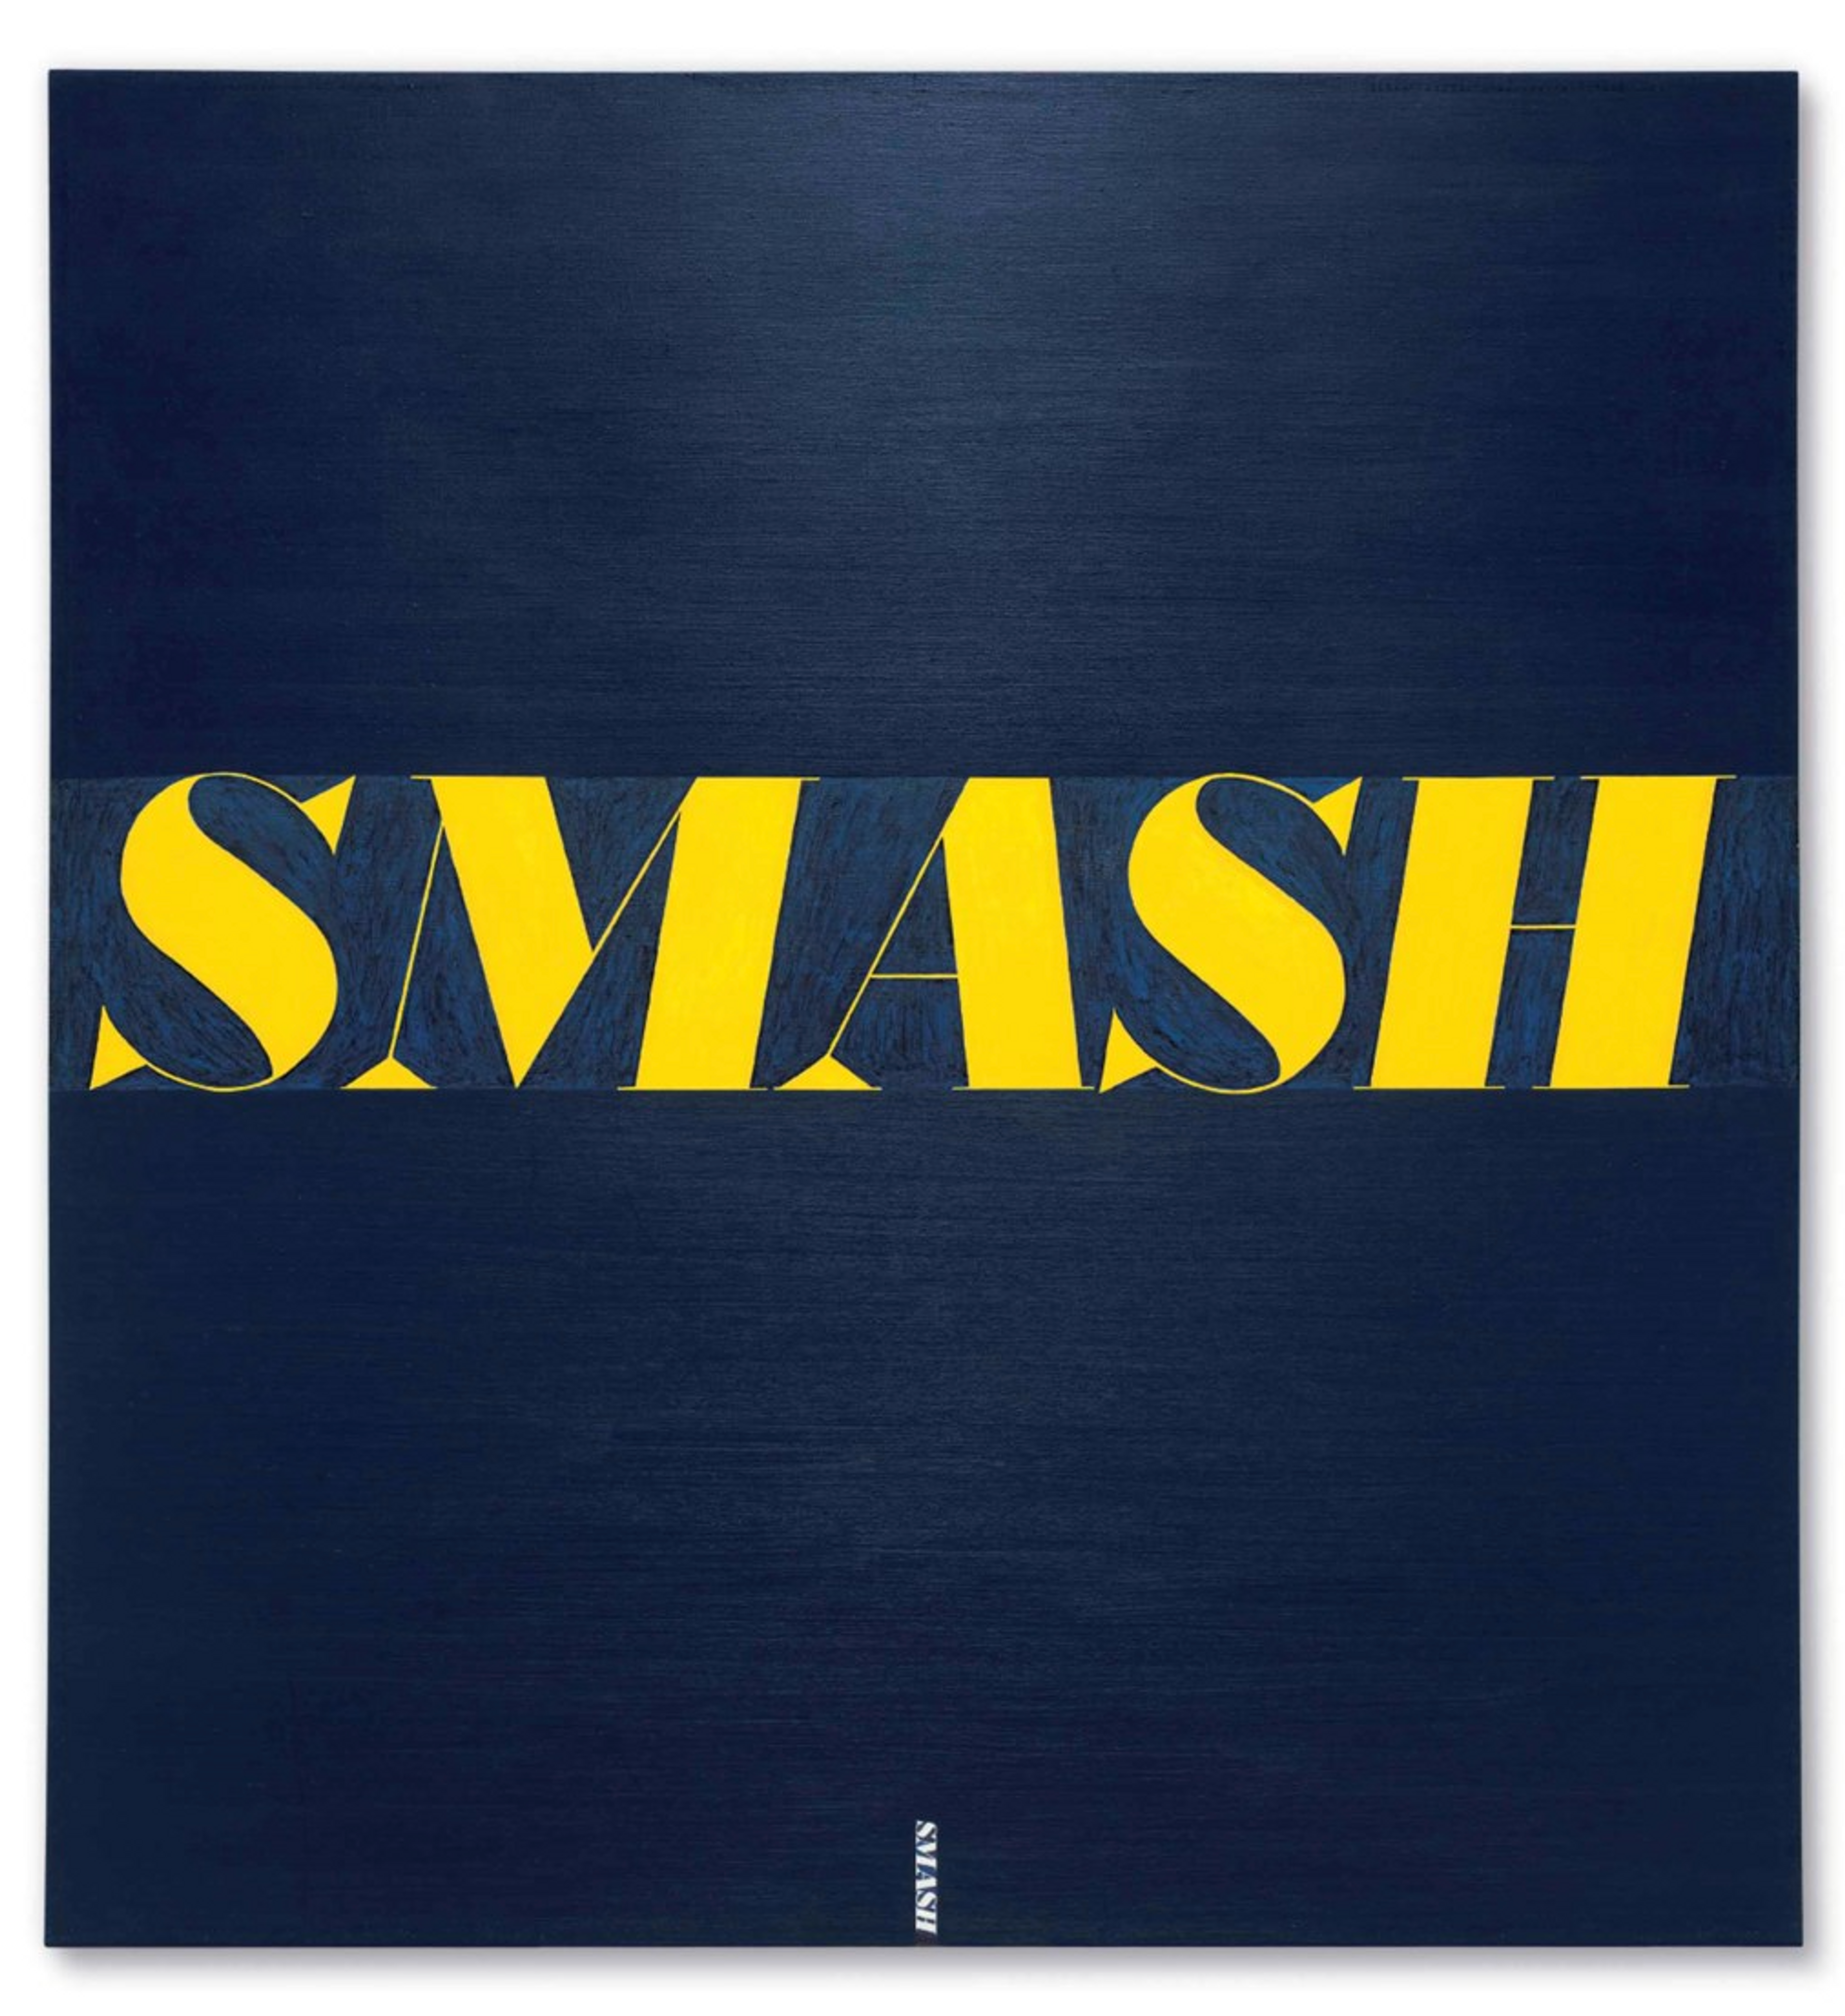 Painting by Ed Ruscha, depicting the word 'smash' in yellow lettering against a navy blue background.